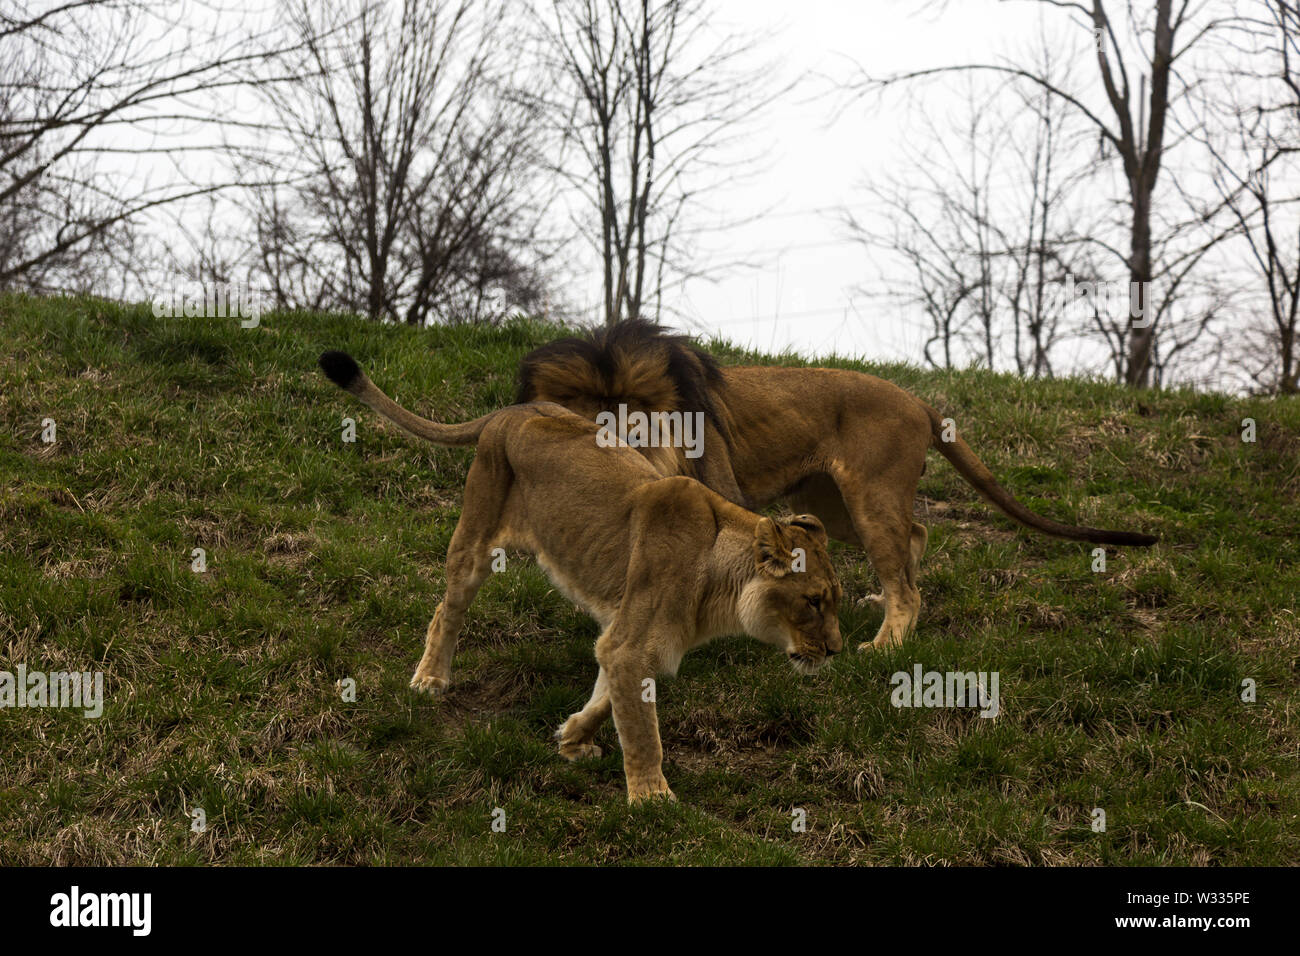 Bahati and Ina, the two African Lions at the Fort Wayne Children's Zoo, during their mating ritual in their enclosure in Fort Wayne, Indiana, USA. Stock Photo